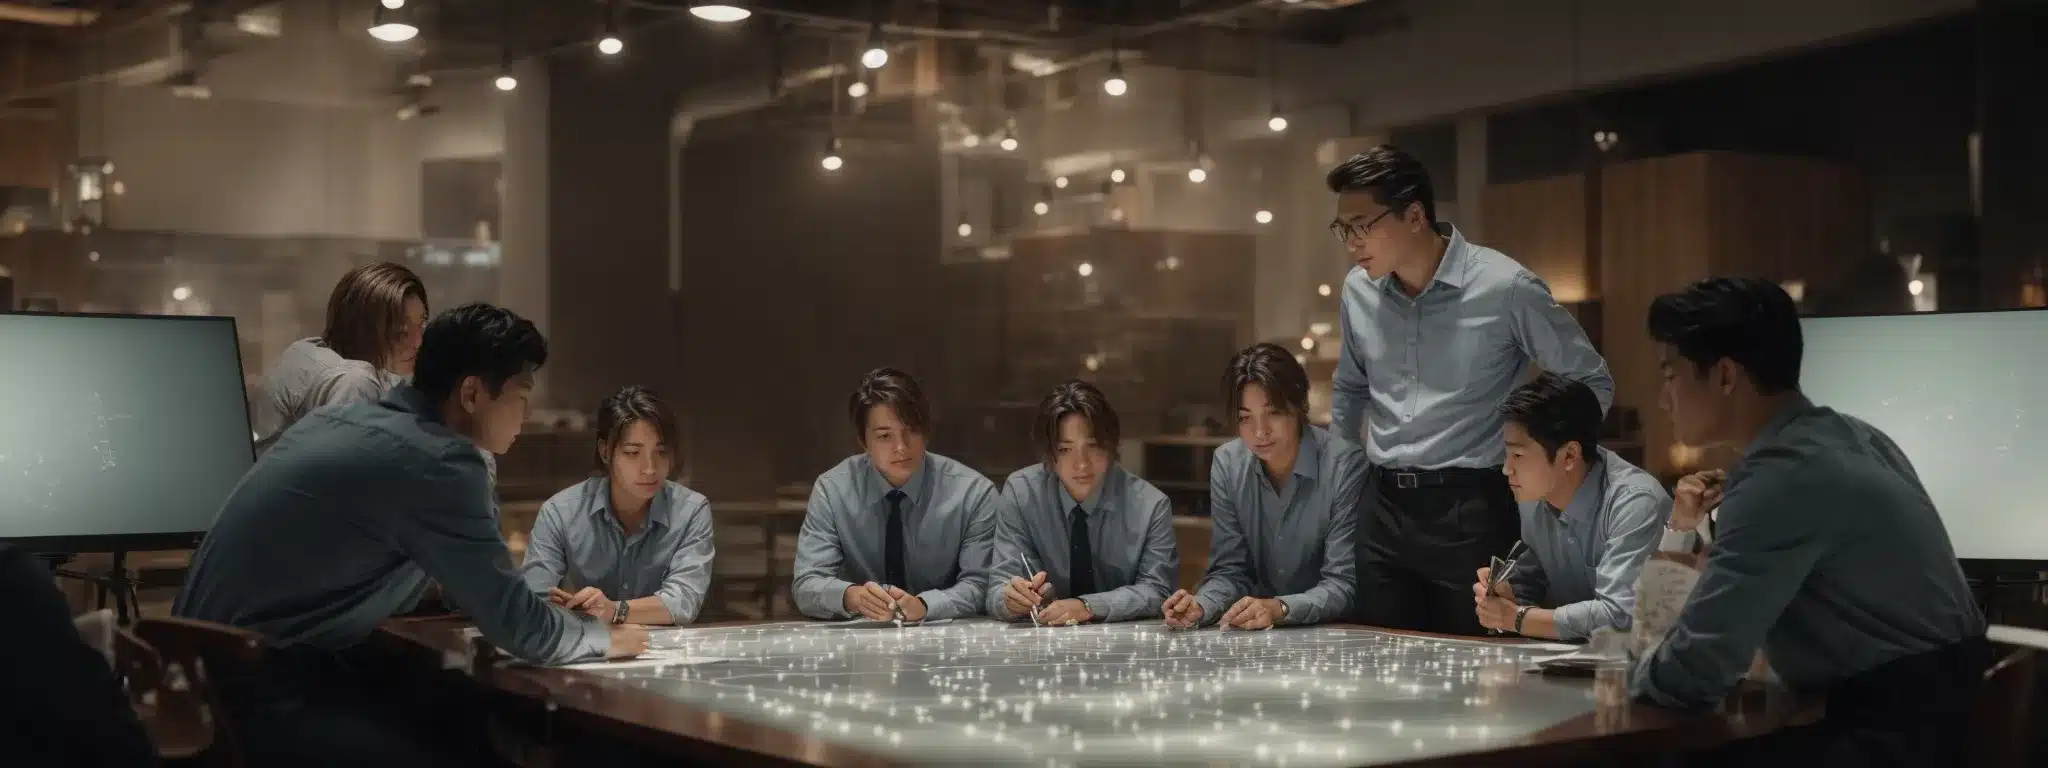 A Team Of Strategists Collaborates Around A Large, Illuminated Table, Refining A Brand Concept On A Canvas.